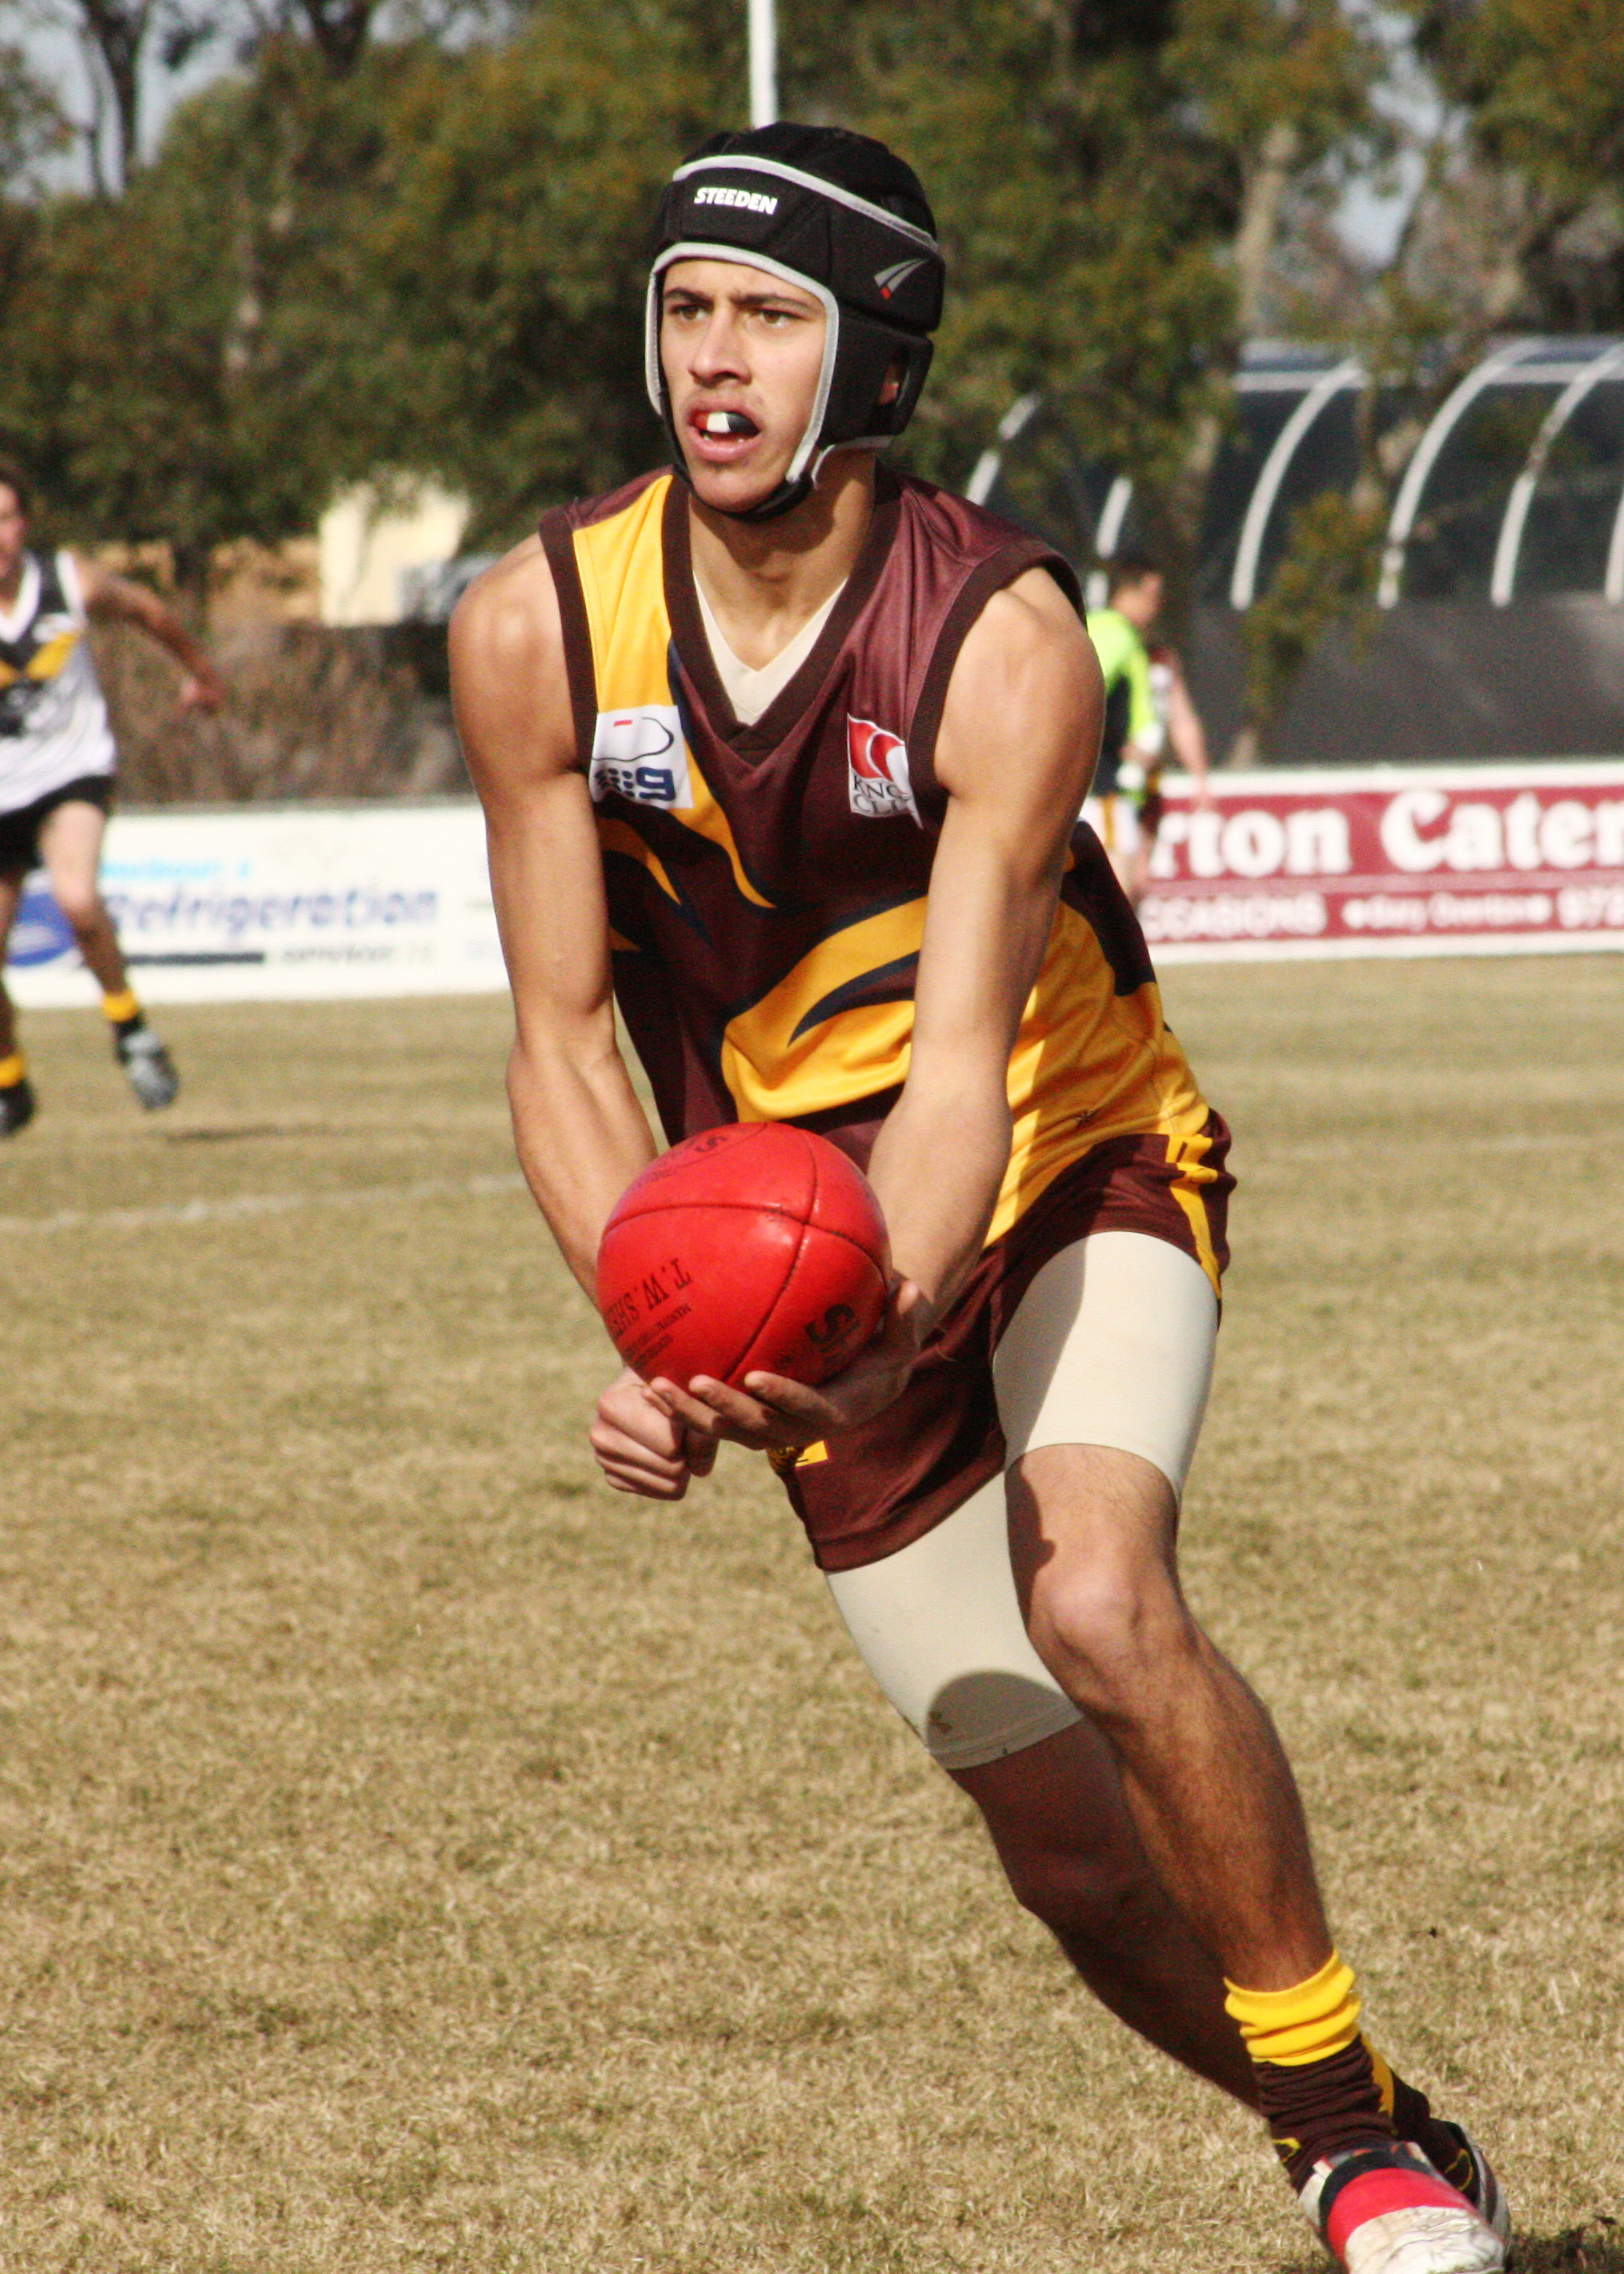 Mitch Wright dominating the member's wing in 2010.